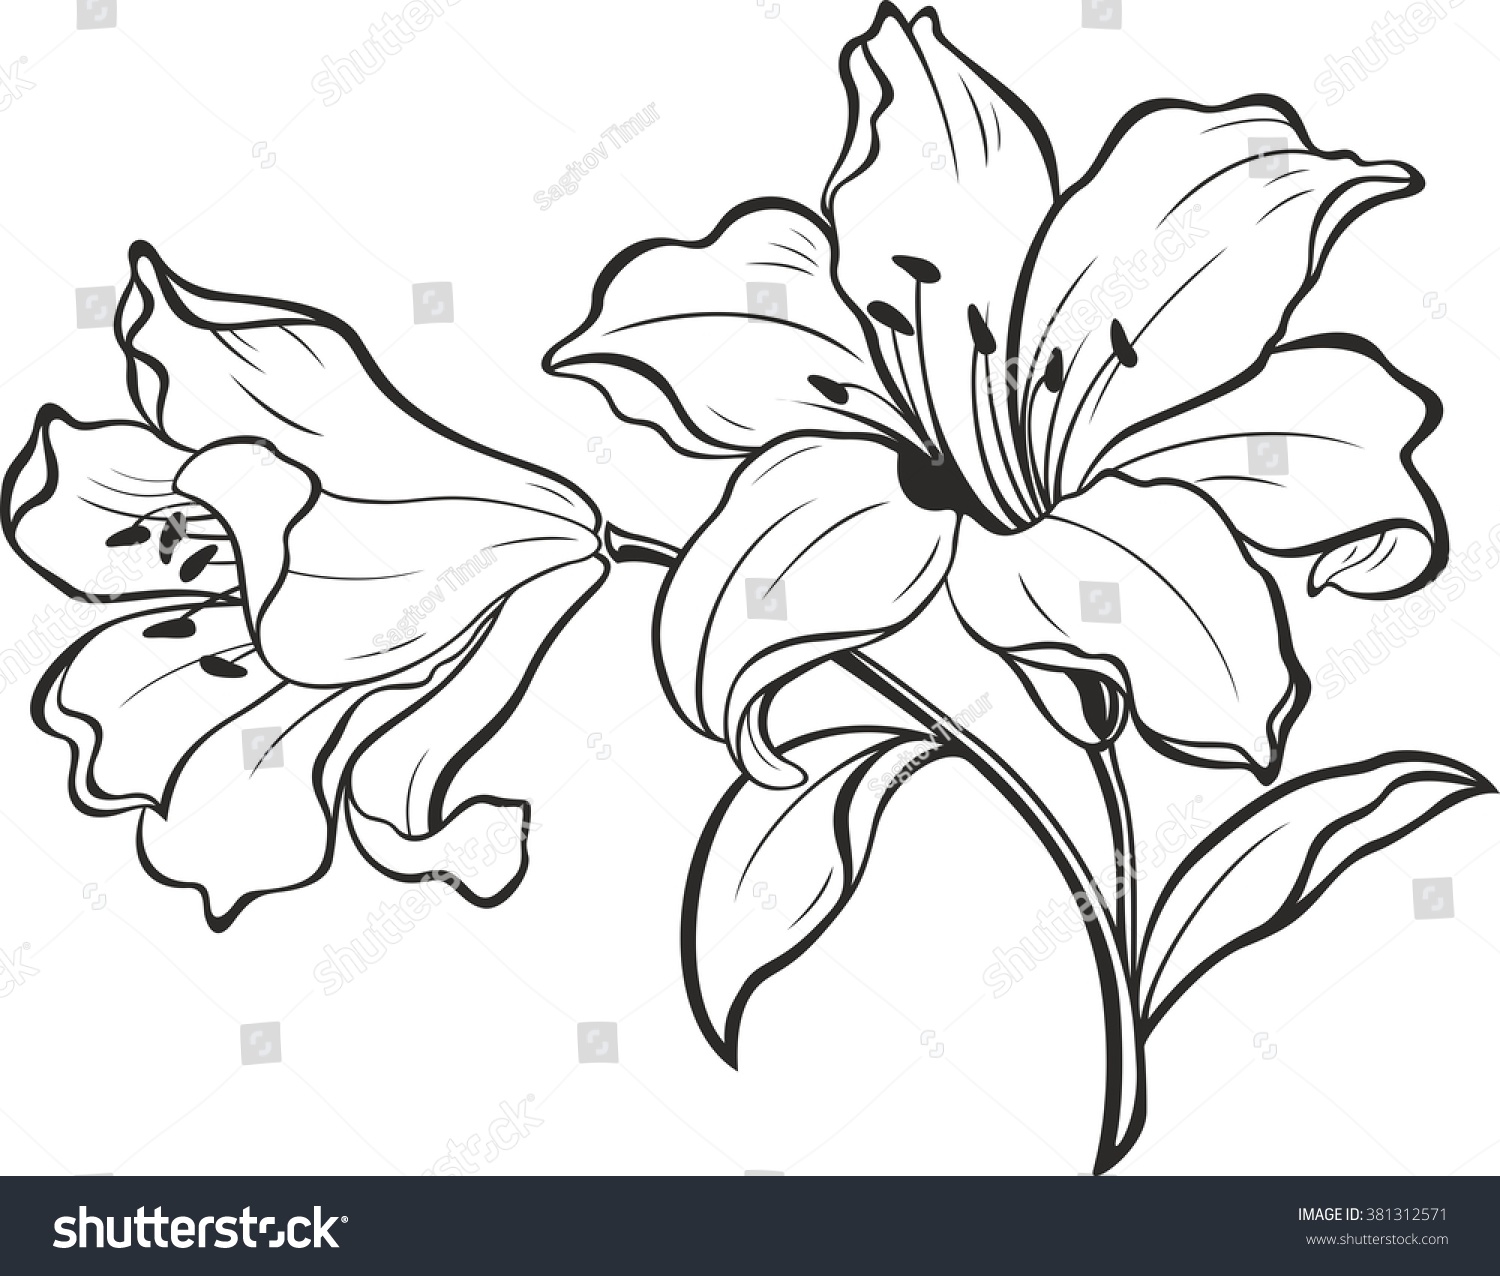 Lily Flowers. Blooming Lily. Card Or Floral Background With Blooming ...